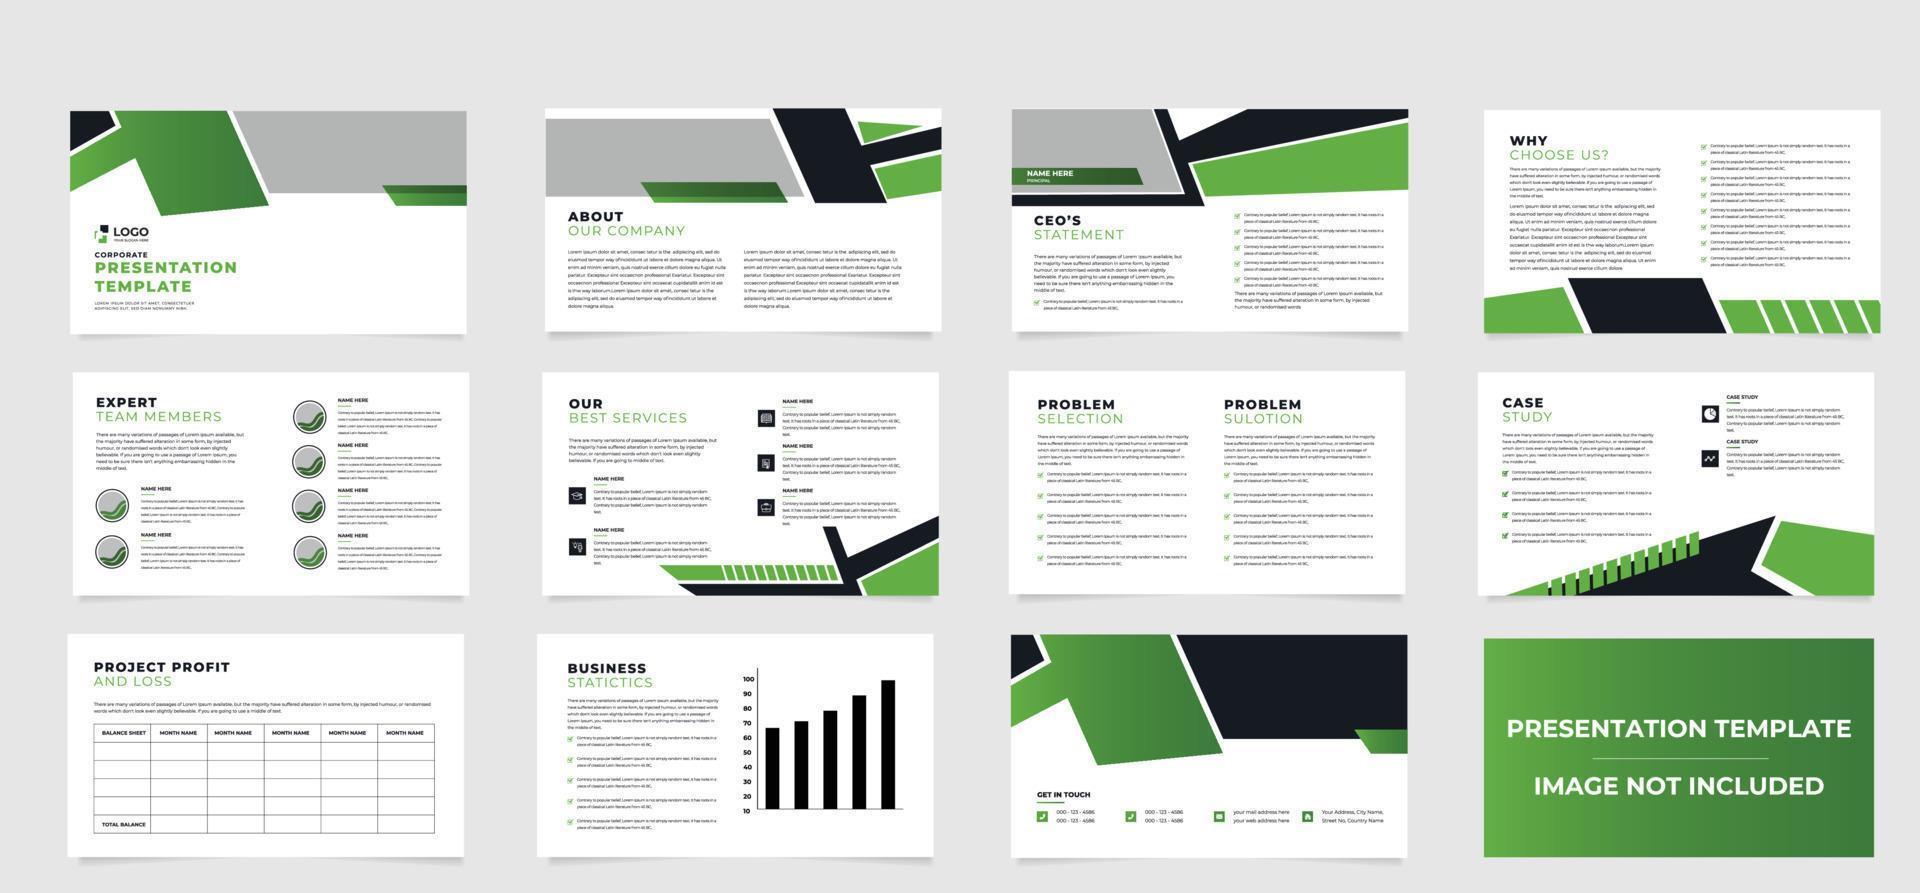 business presentation backgrounds design template and page layout design for brochure ,book , magazine, annual report and company profile vector